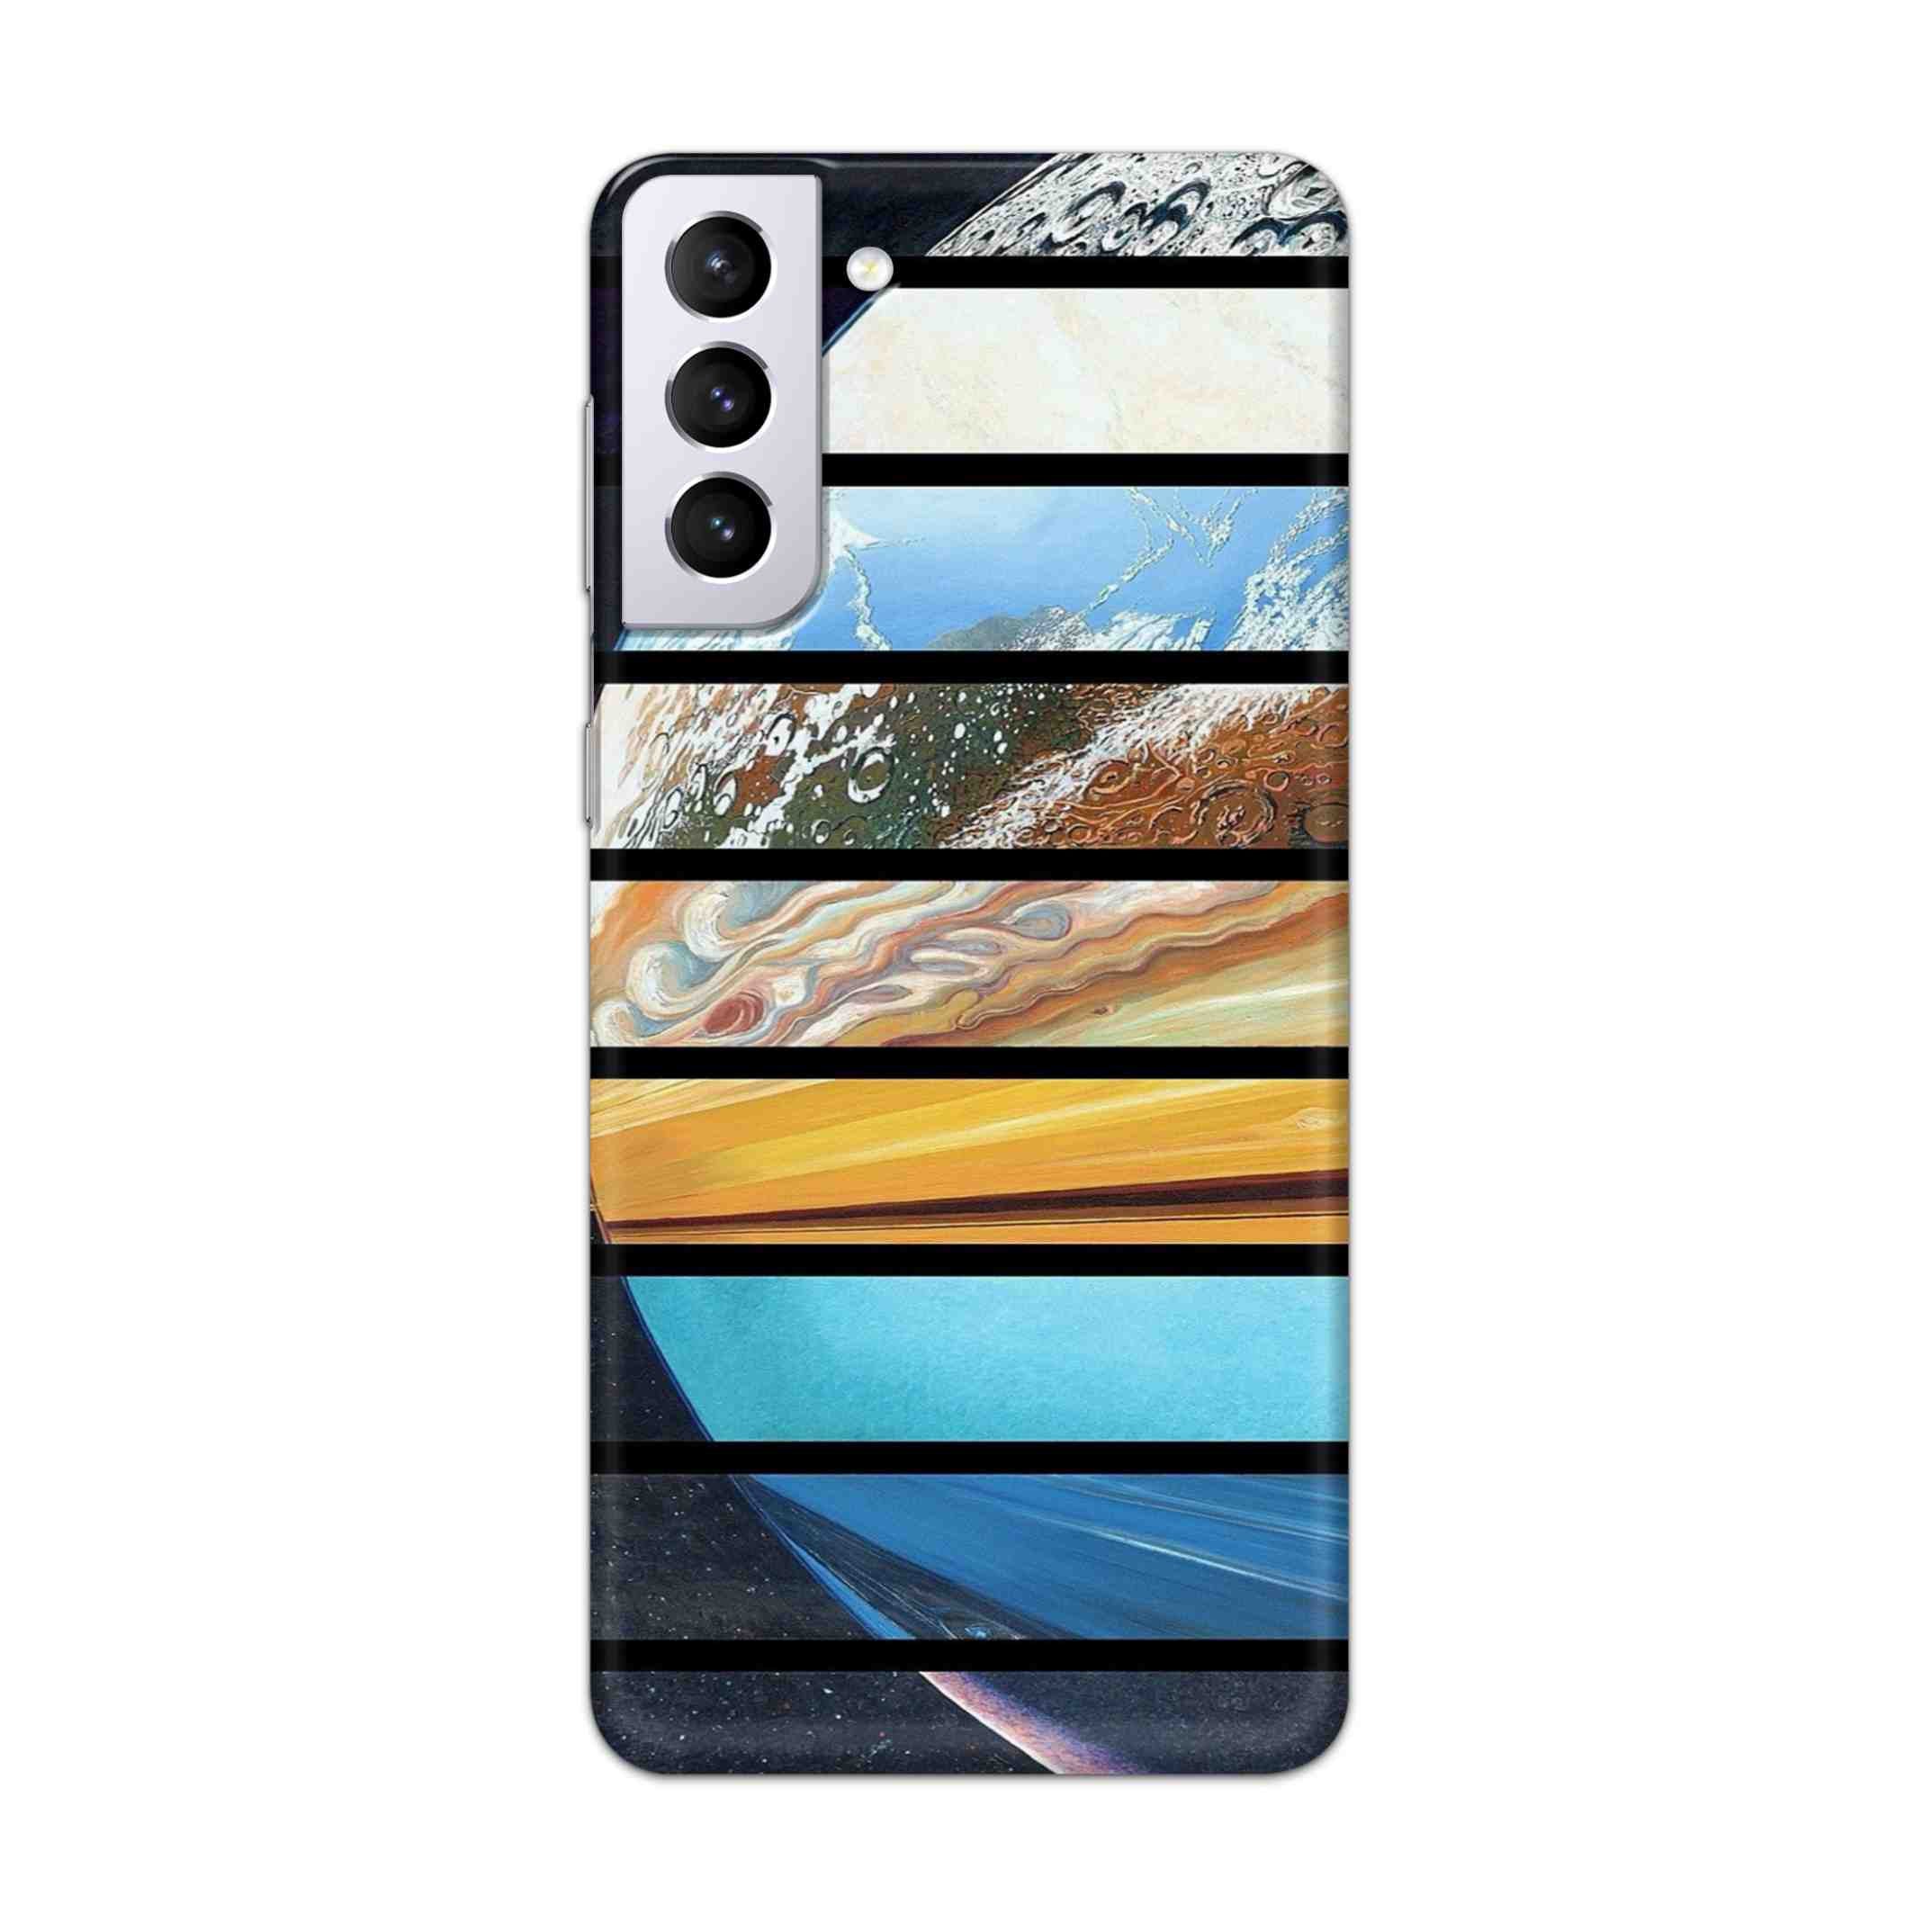 Buy Colourful Earth Hard Back Mobile Phone Case Cover For Samsung Galaxy S21 Plus Online